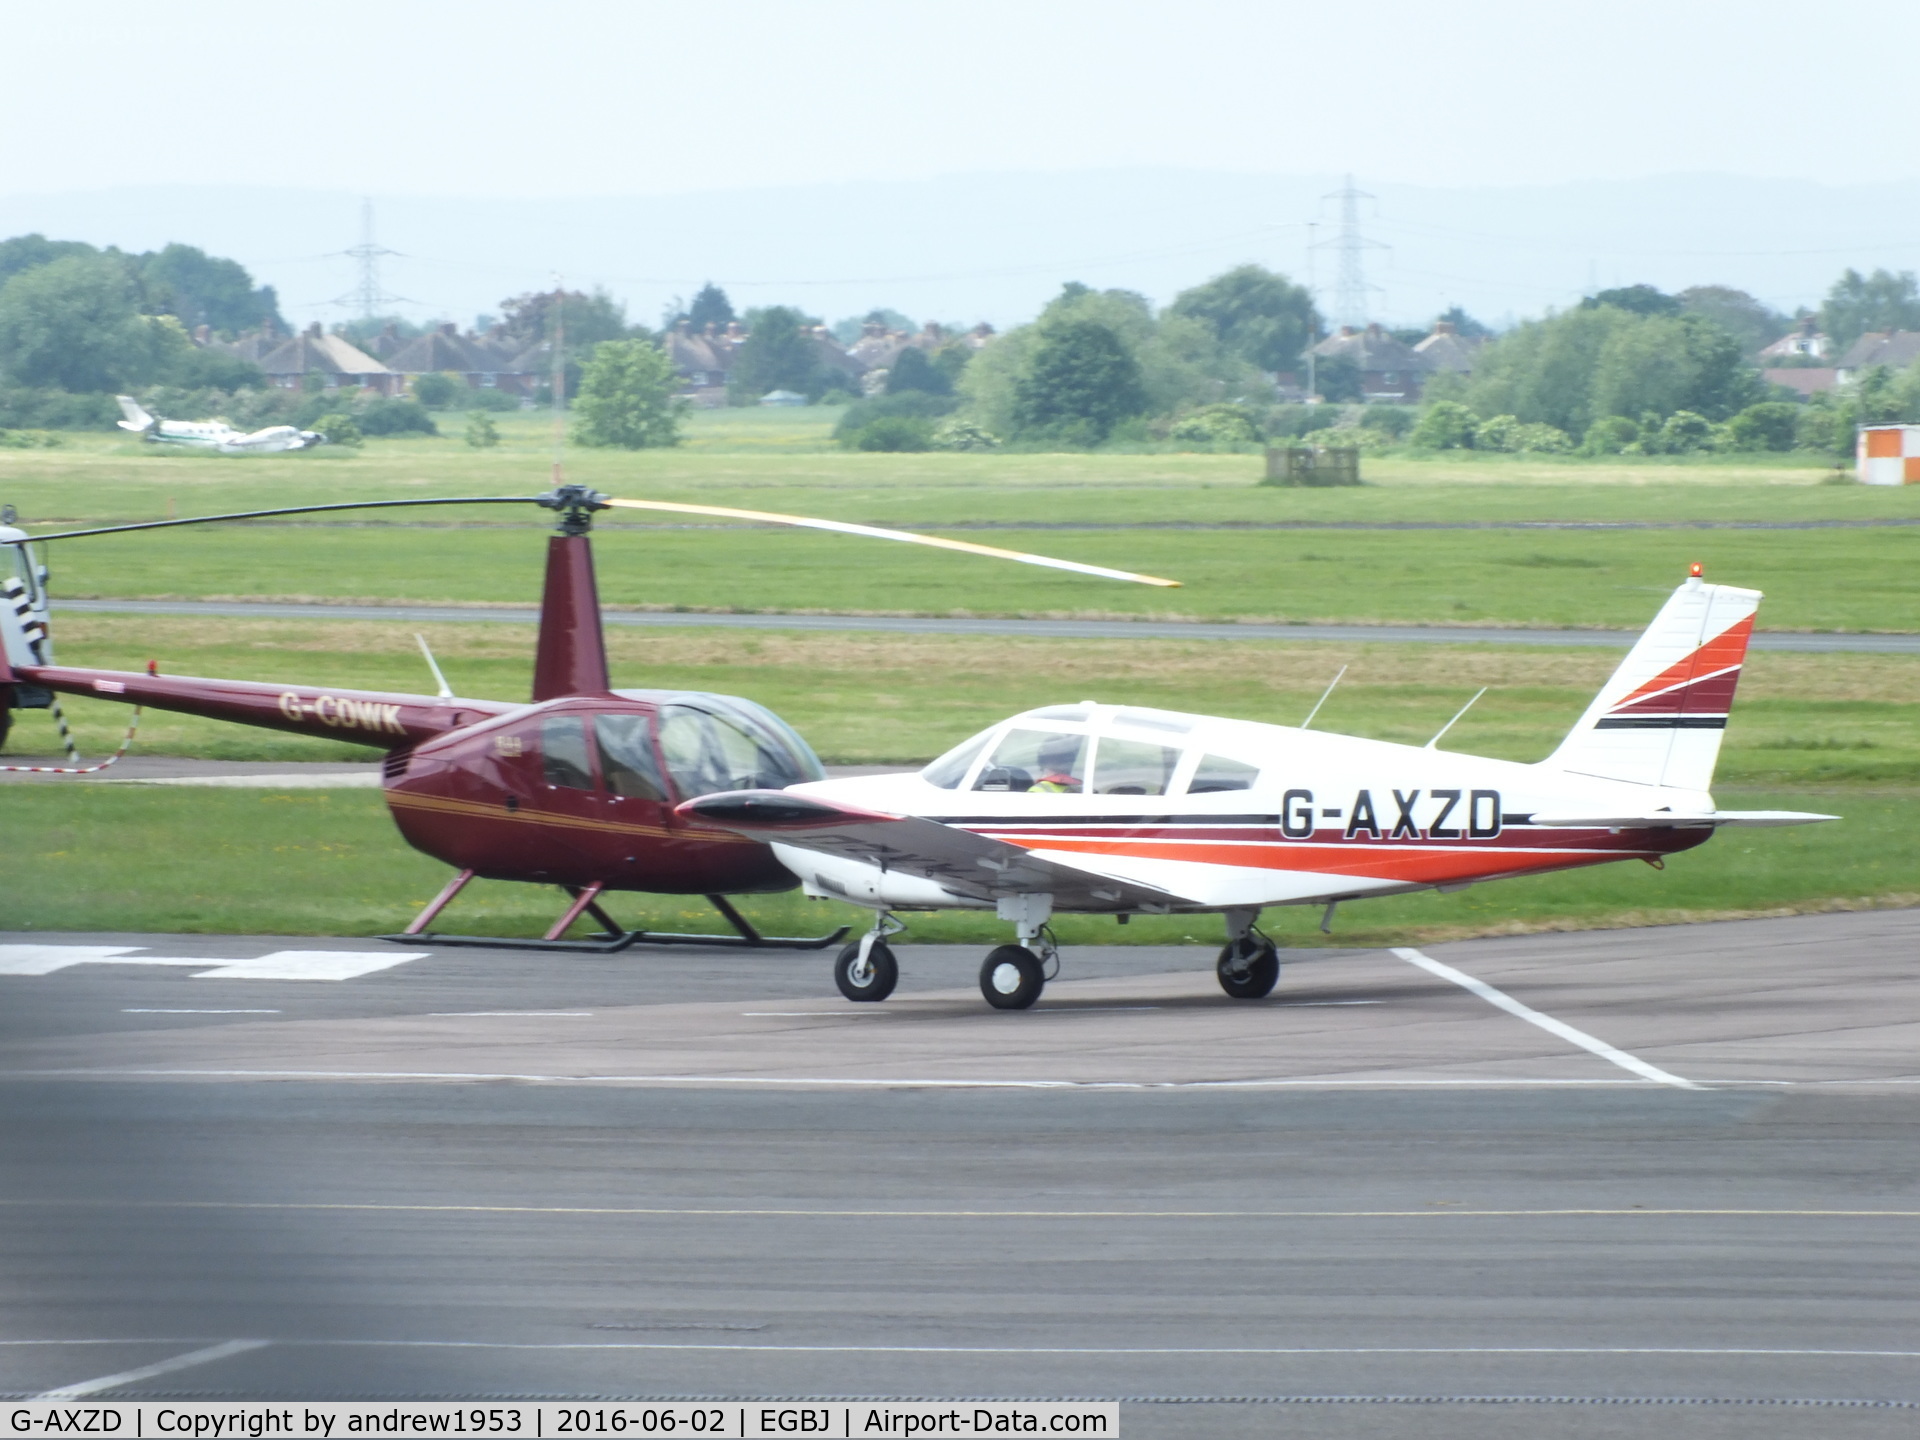 G-AXZD, 1970 Piper PA-28-180 Cherokee C/N 28-5609, G-AXZD at Gloucestershire Airport.